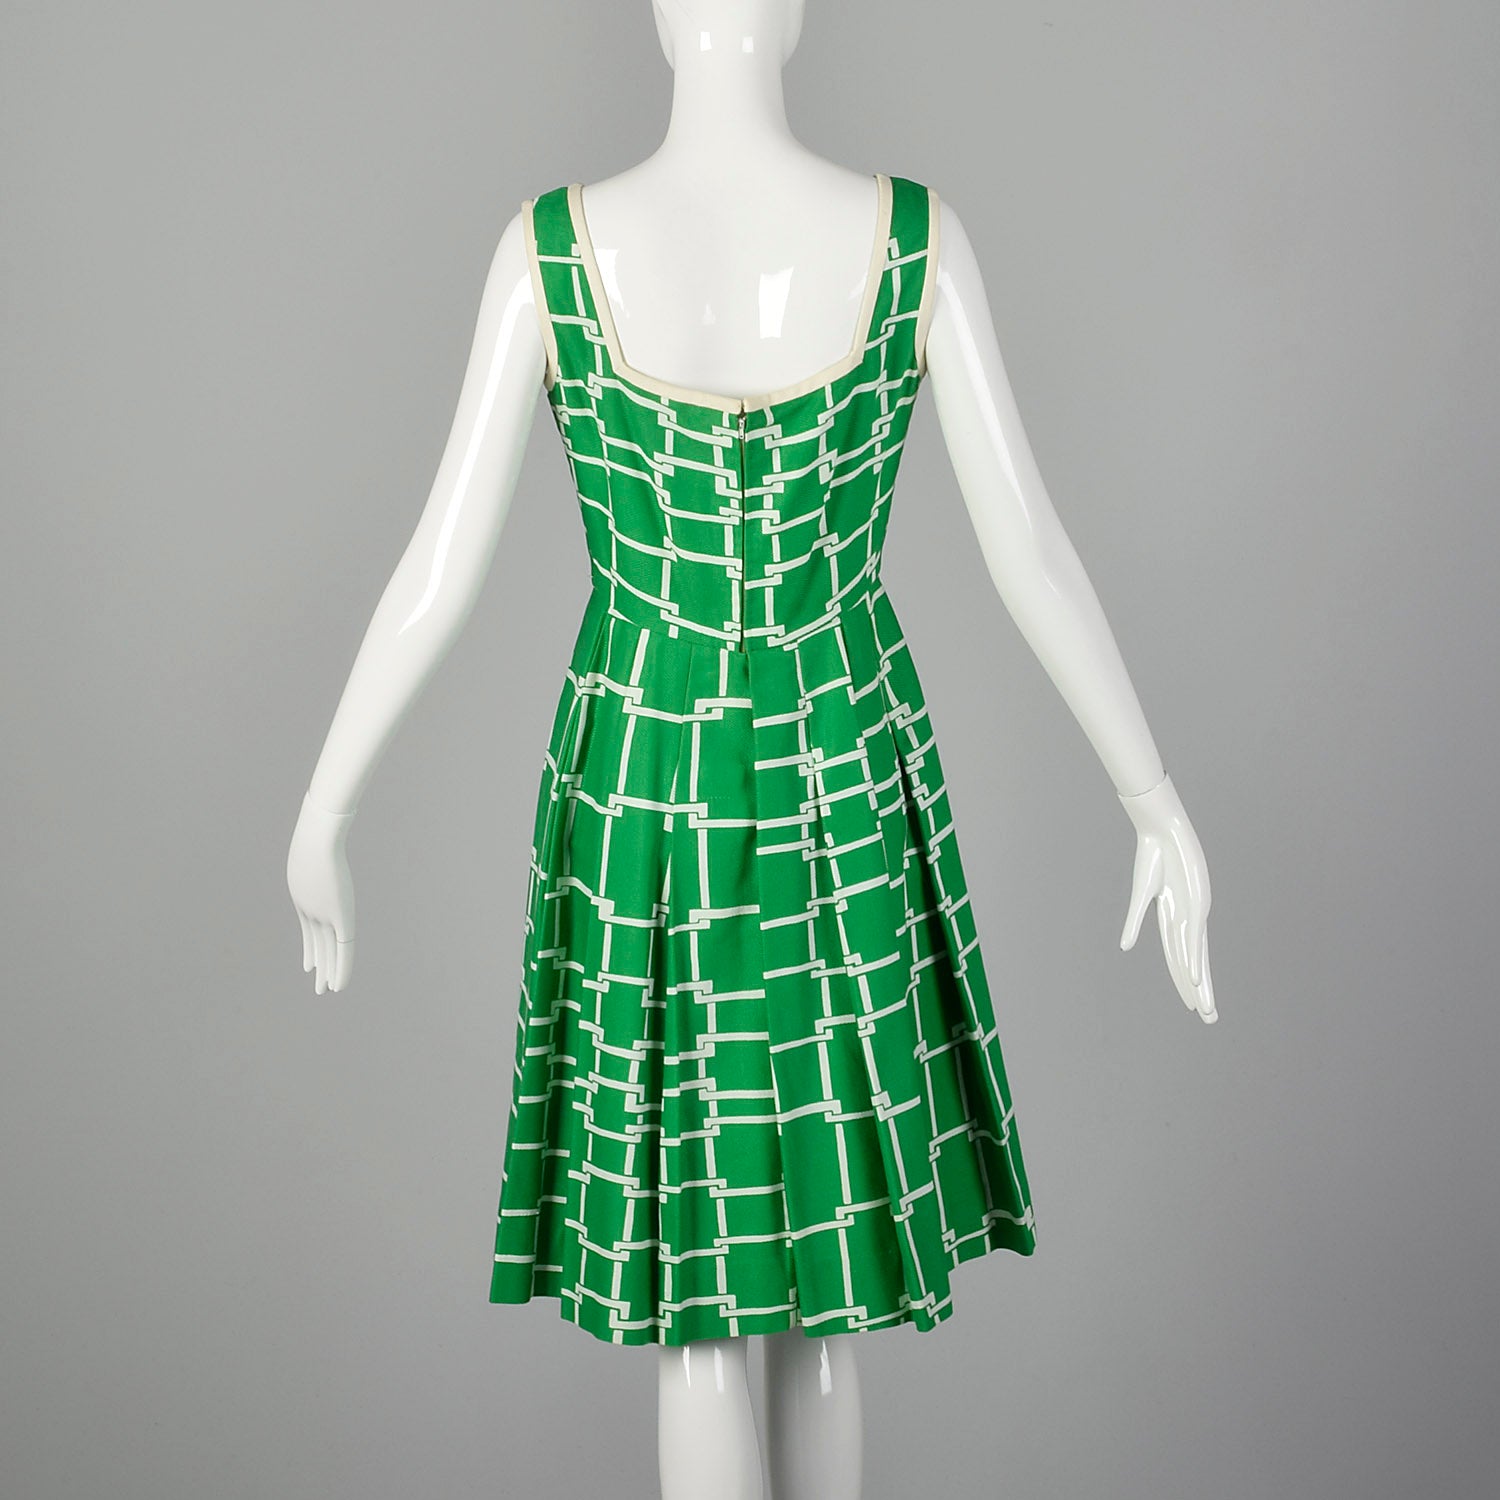 Small Malcolm Star 1960s Green and White Dress